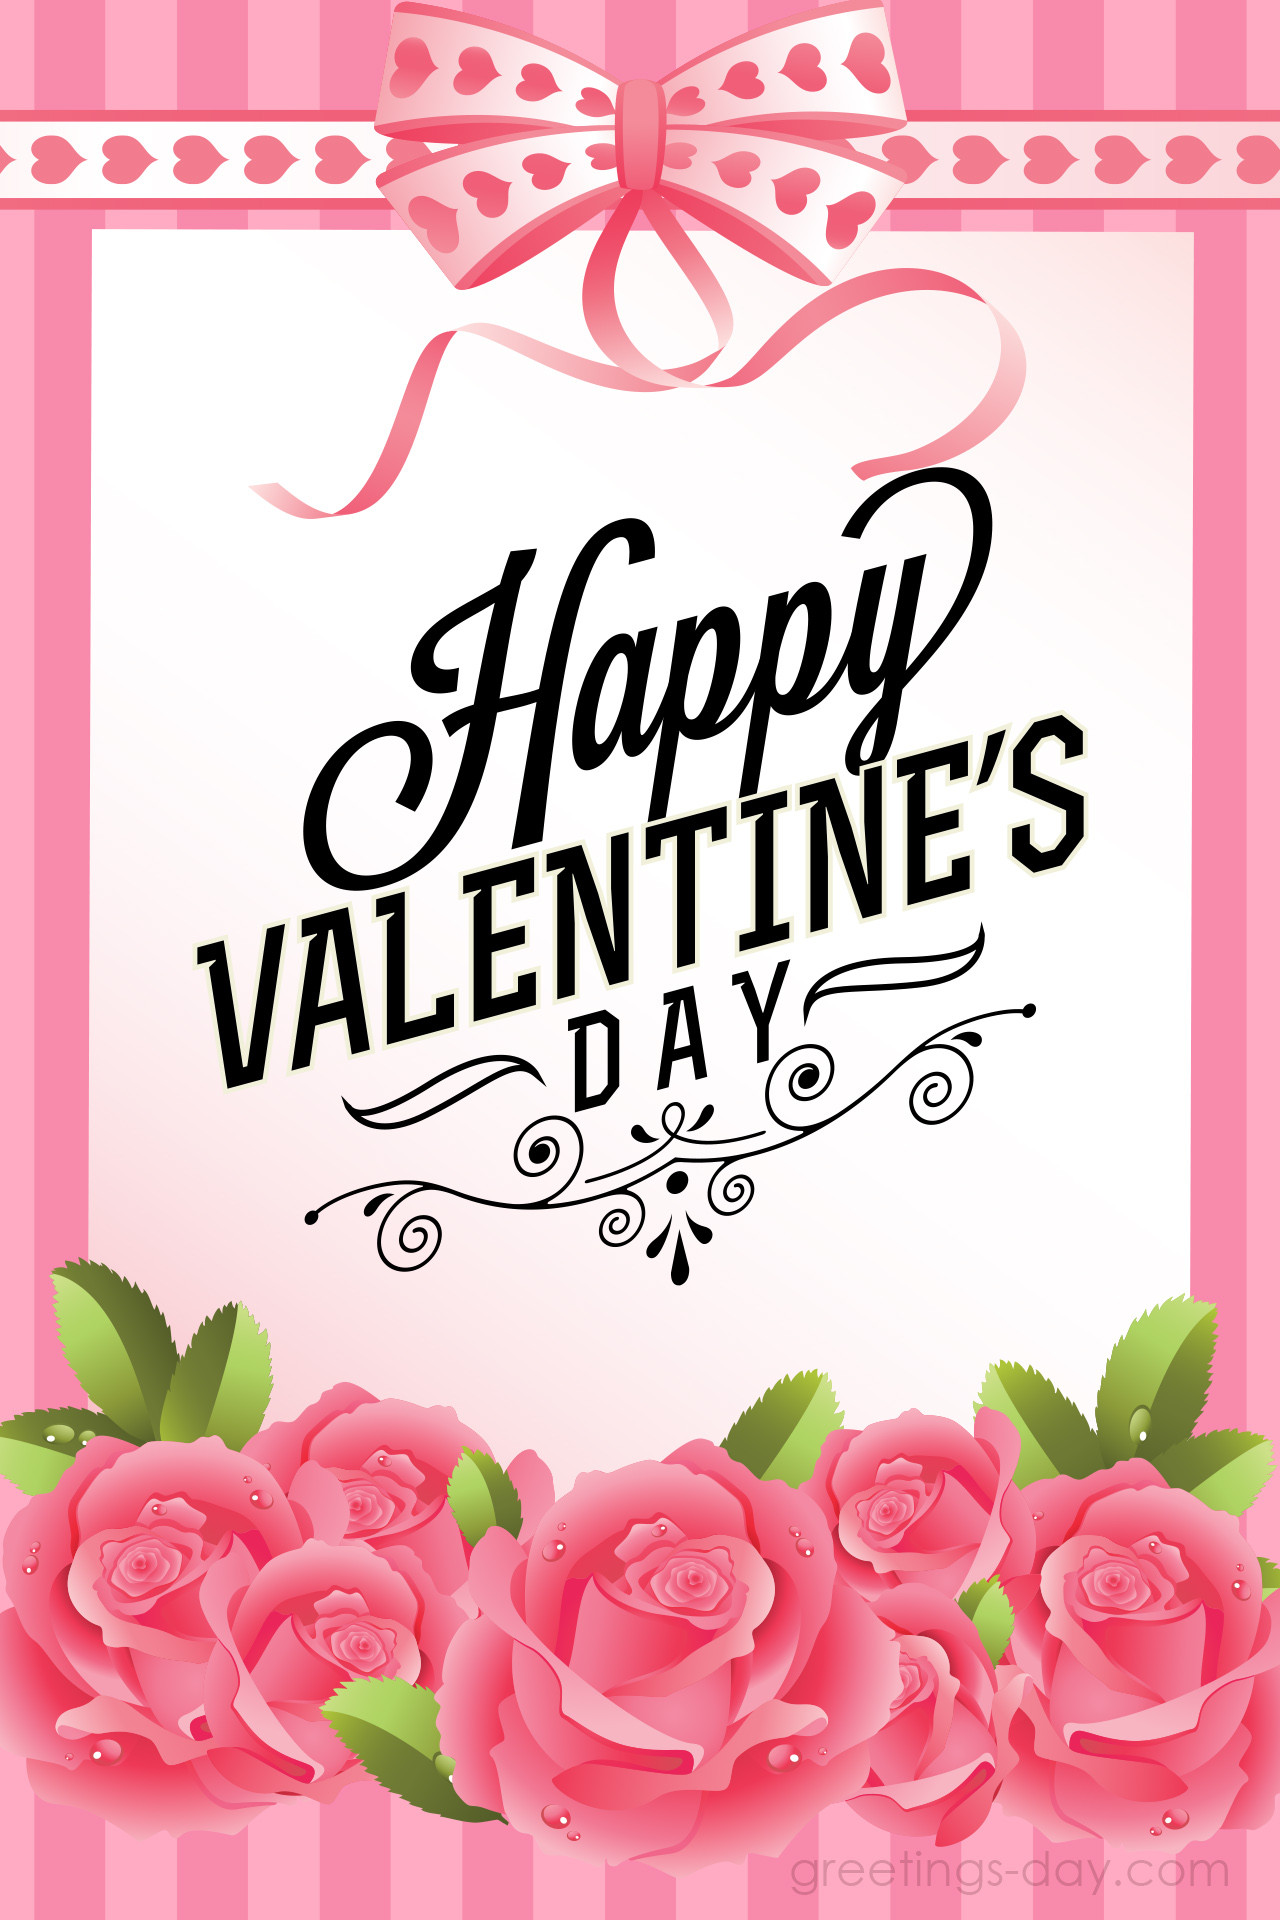 Quotes For Valentines Day Cards
 Valentine s Day Quotes and Flowers for Friends and Family